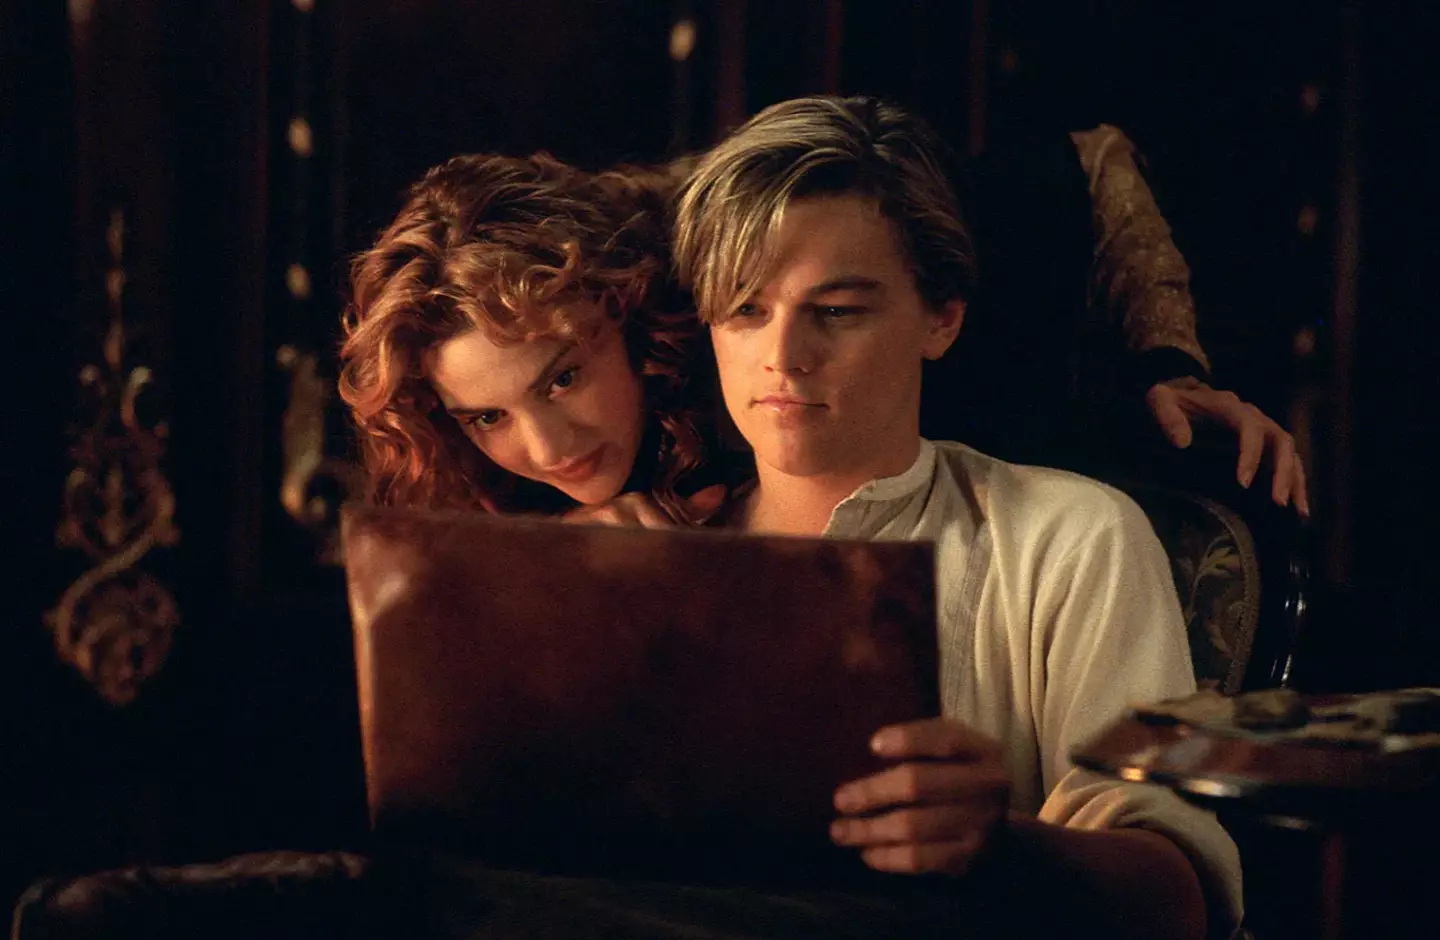 Titanic ran for a staggering three hours.